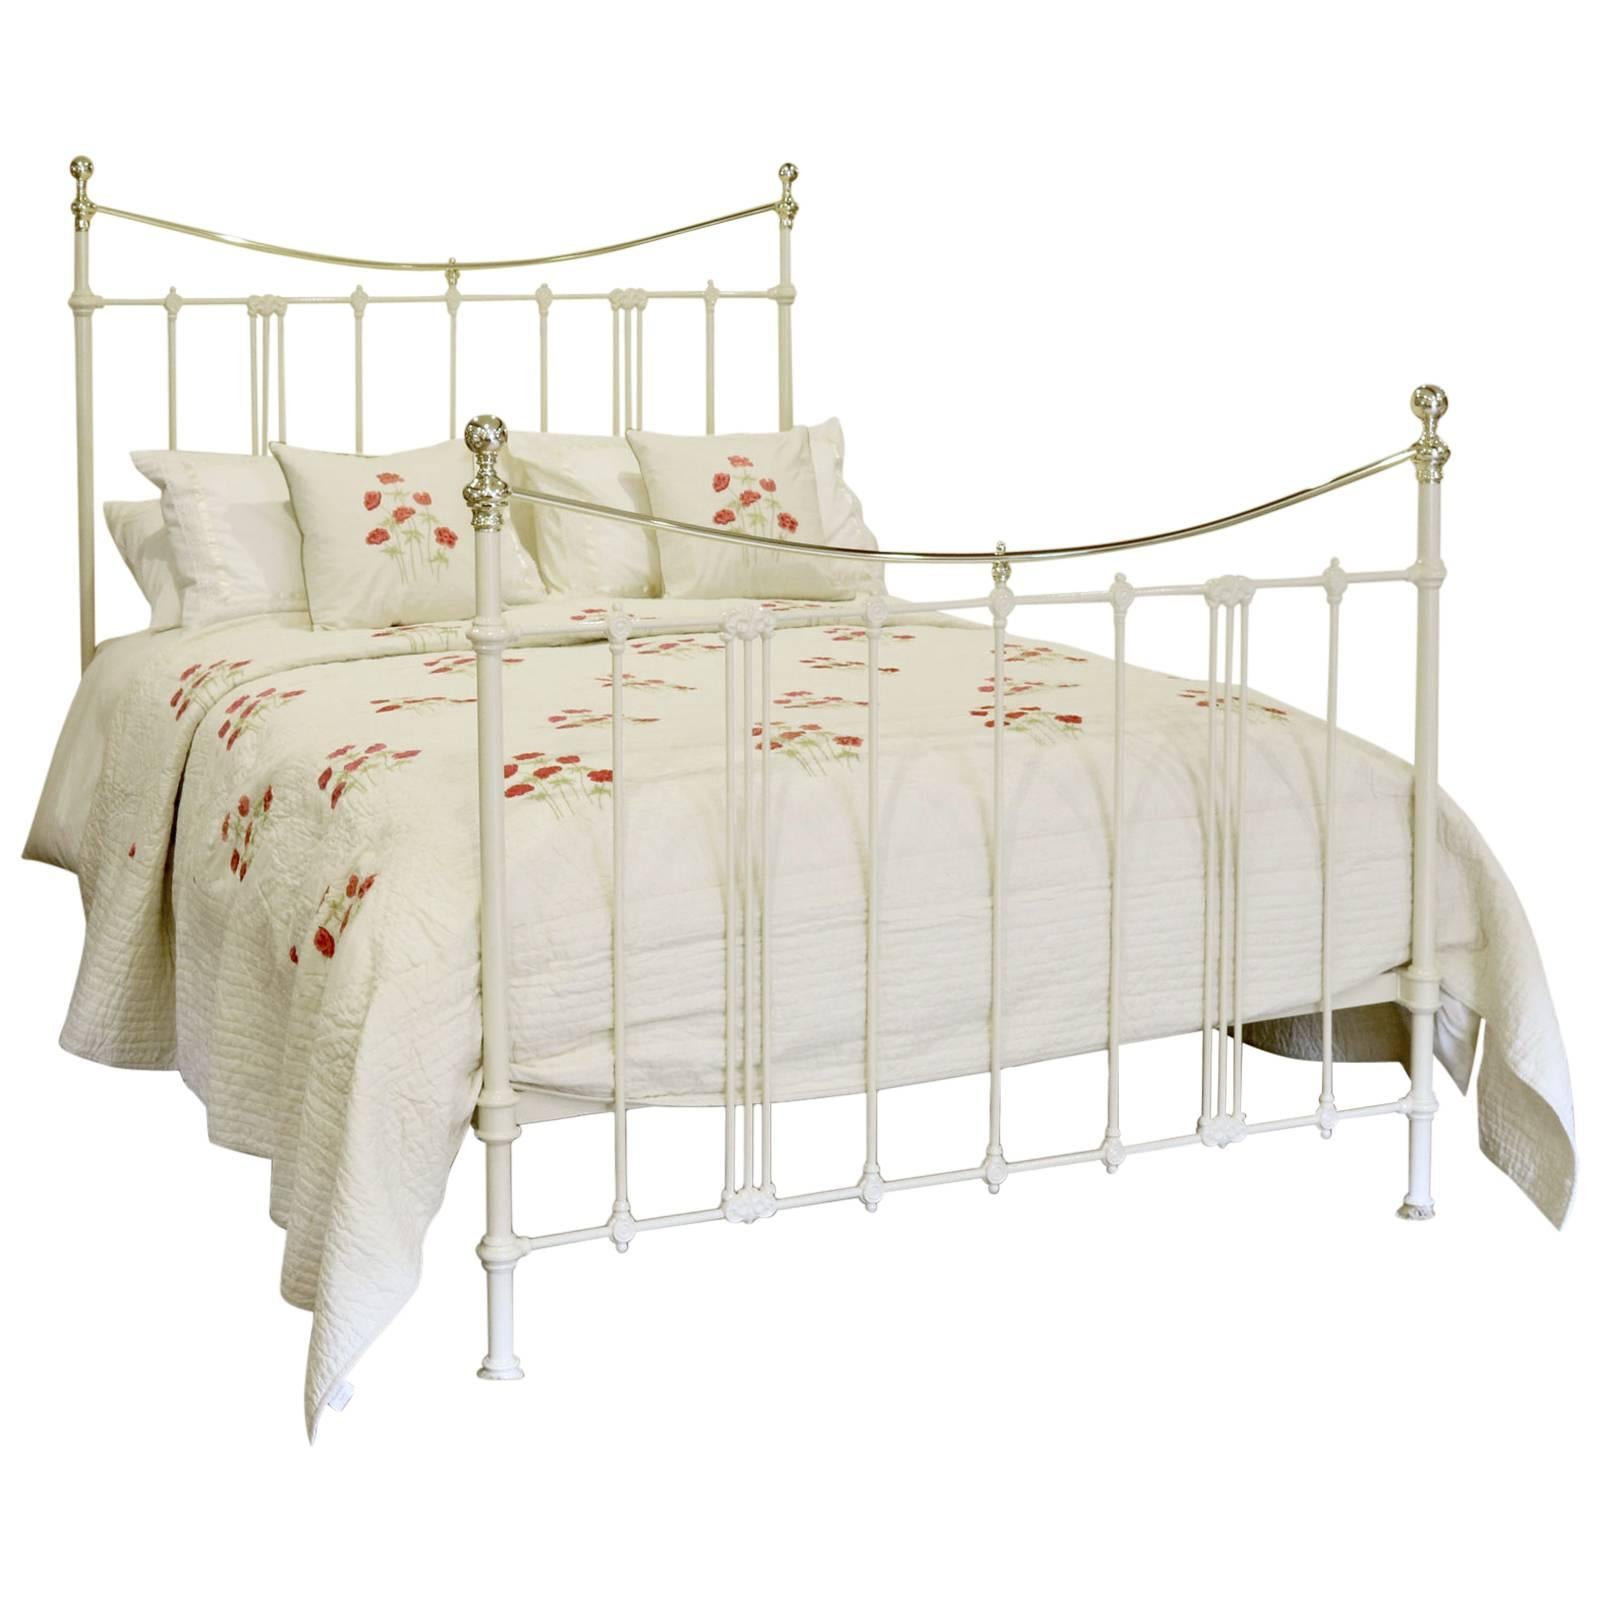 Art Nouveau Style Brass and Iron Bed